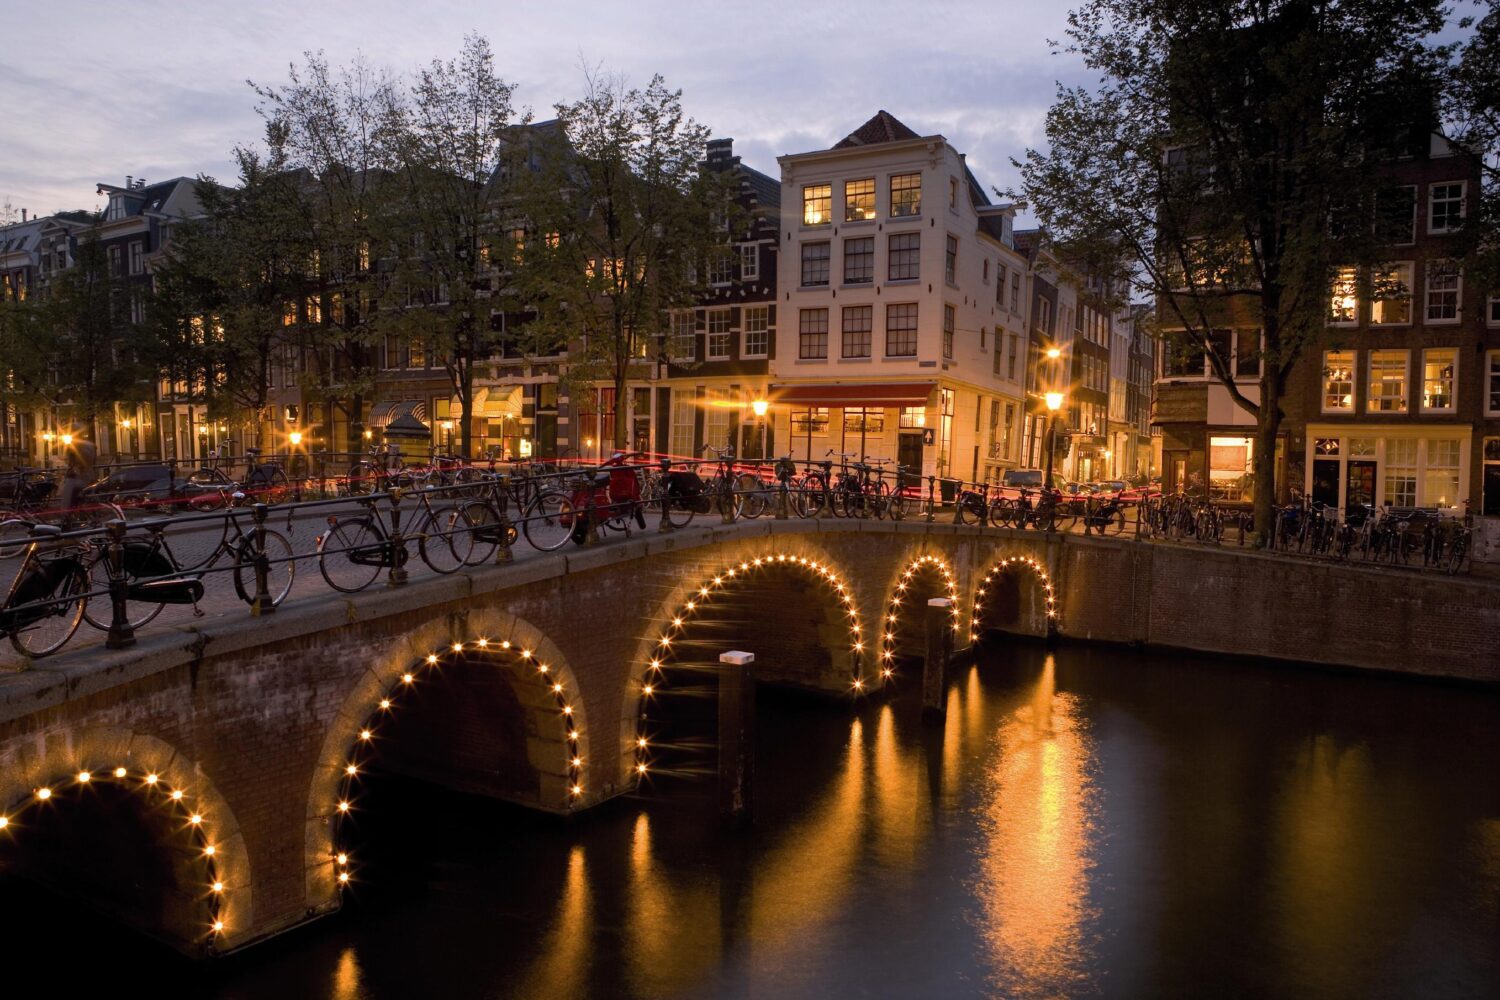 Bridge with lights in the evening in Amsterdam